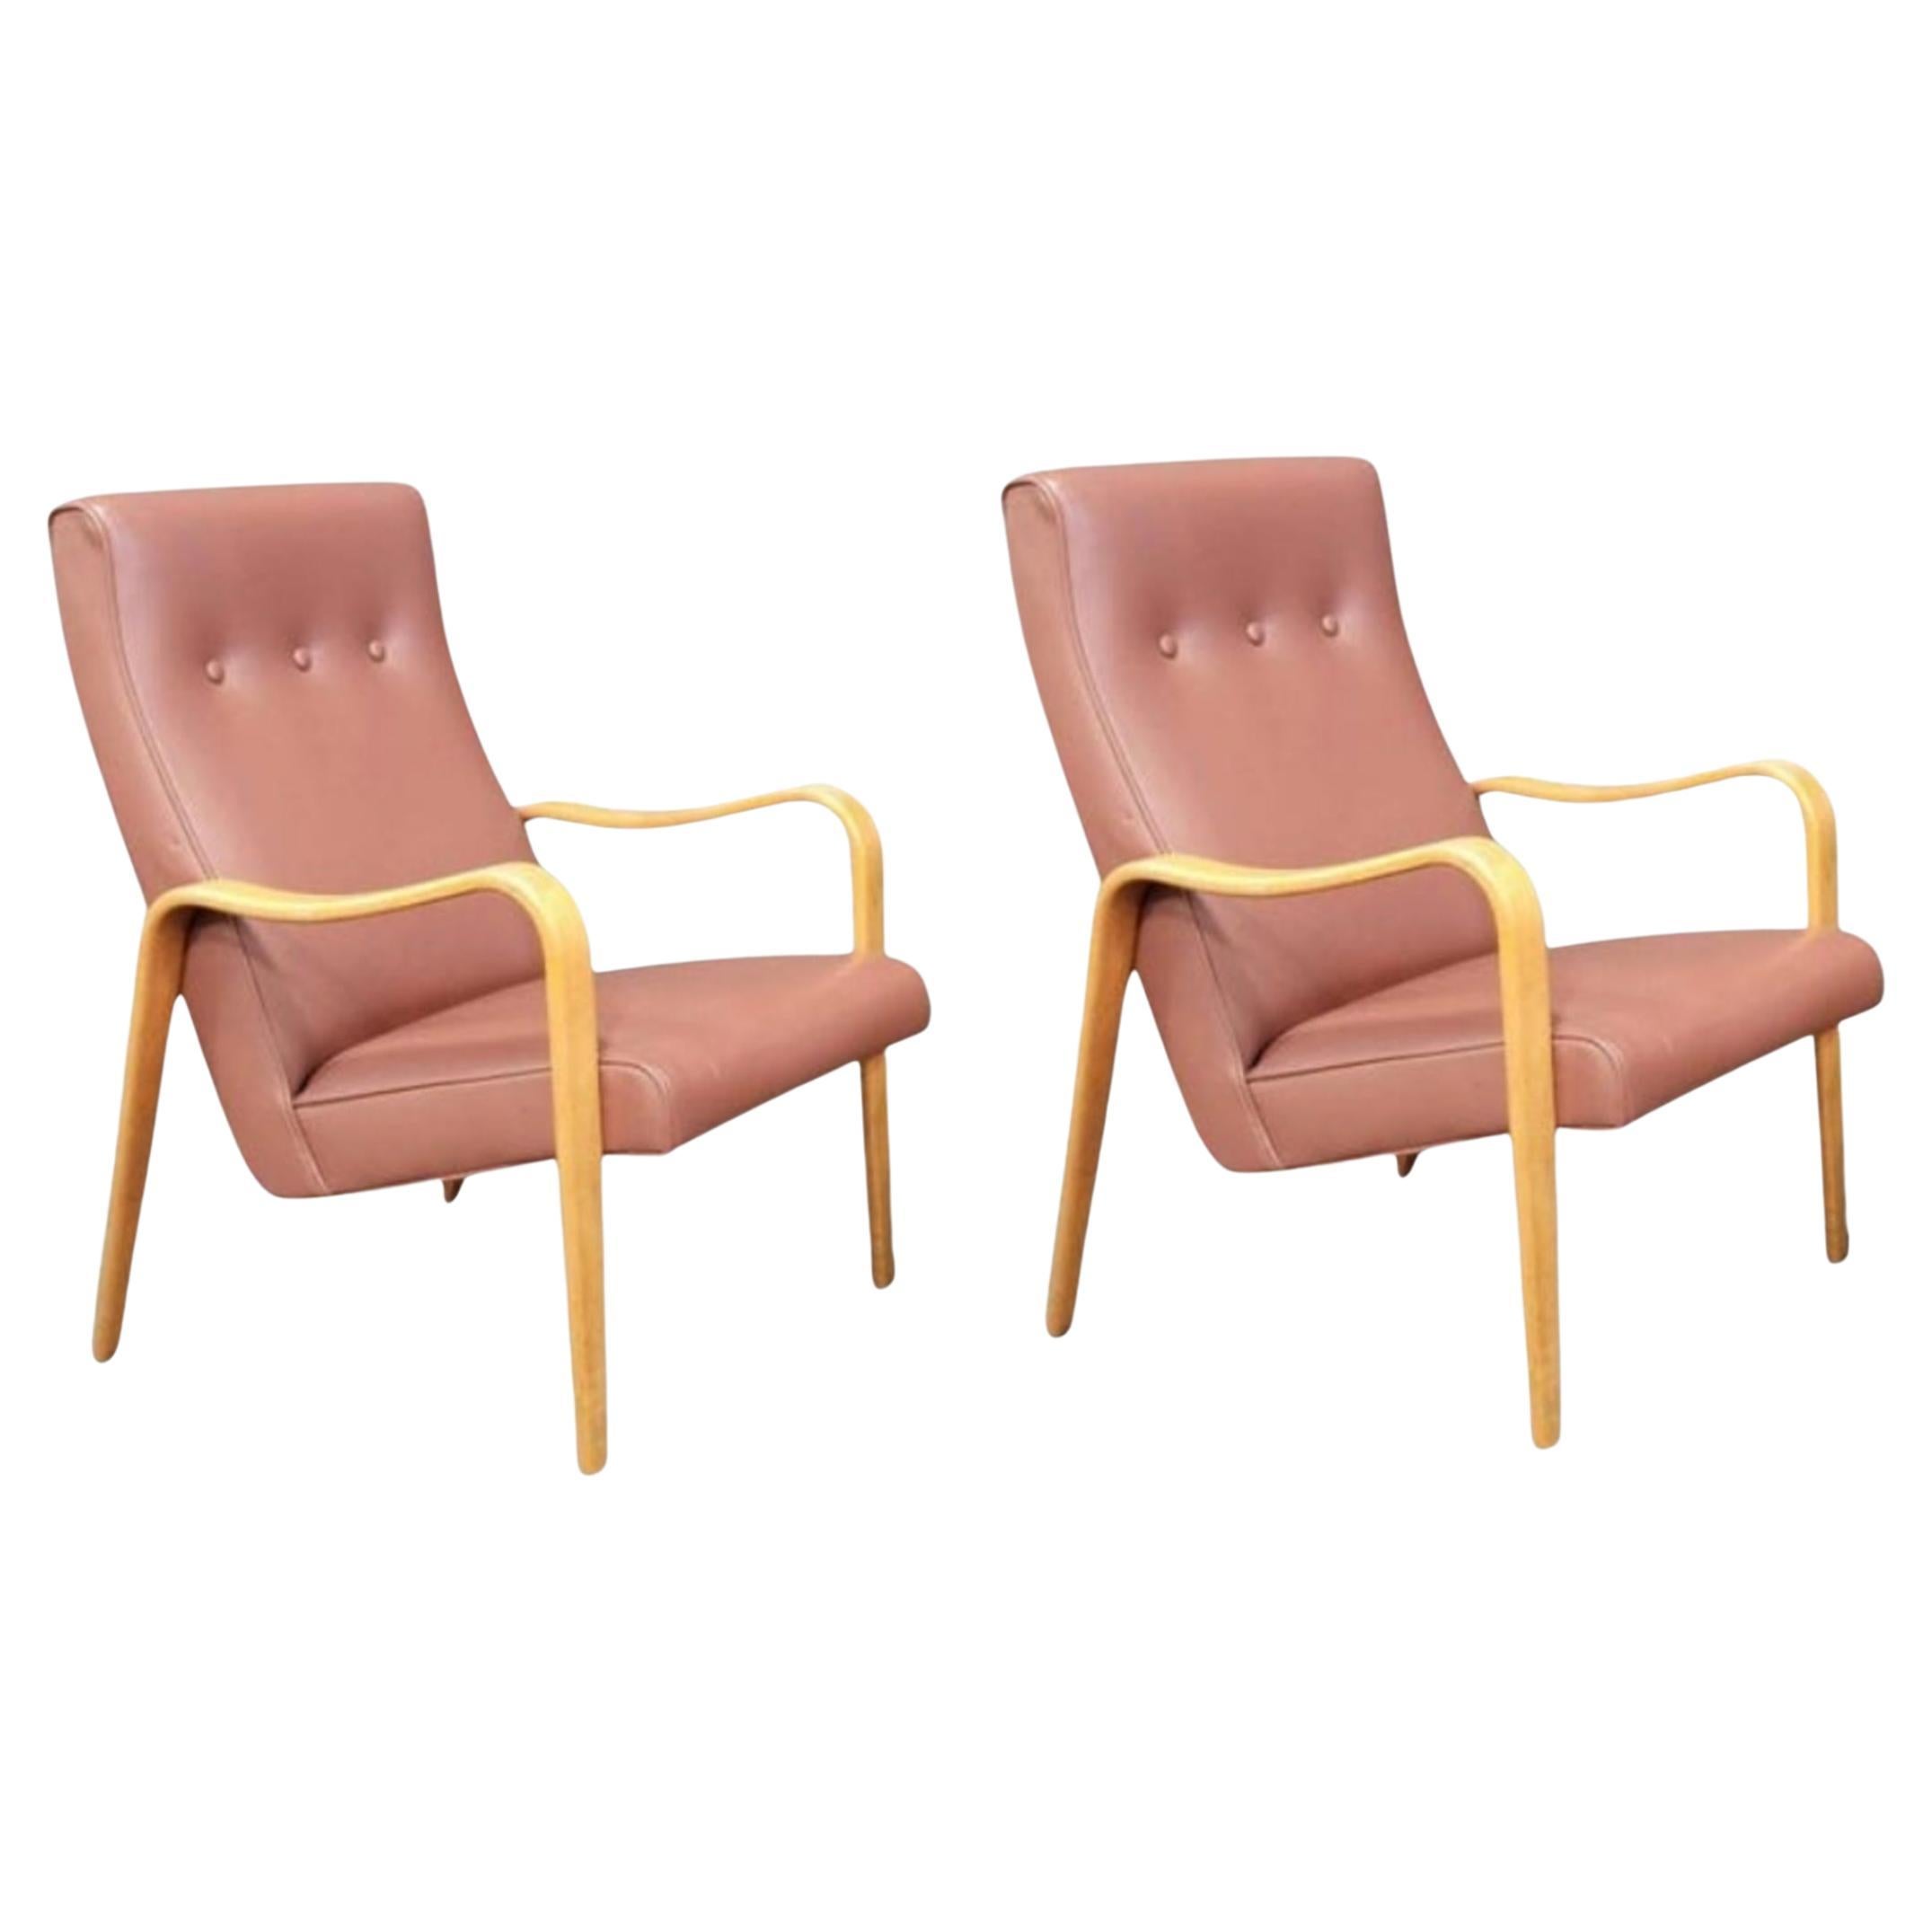 Pair of Mid-Century Modern Thonet Bentwood Birch Lounge Arm Chairs  For Sale